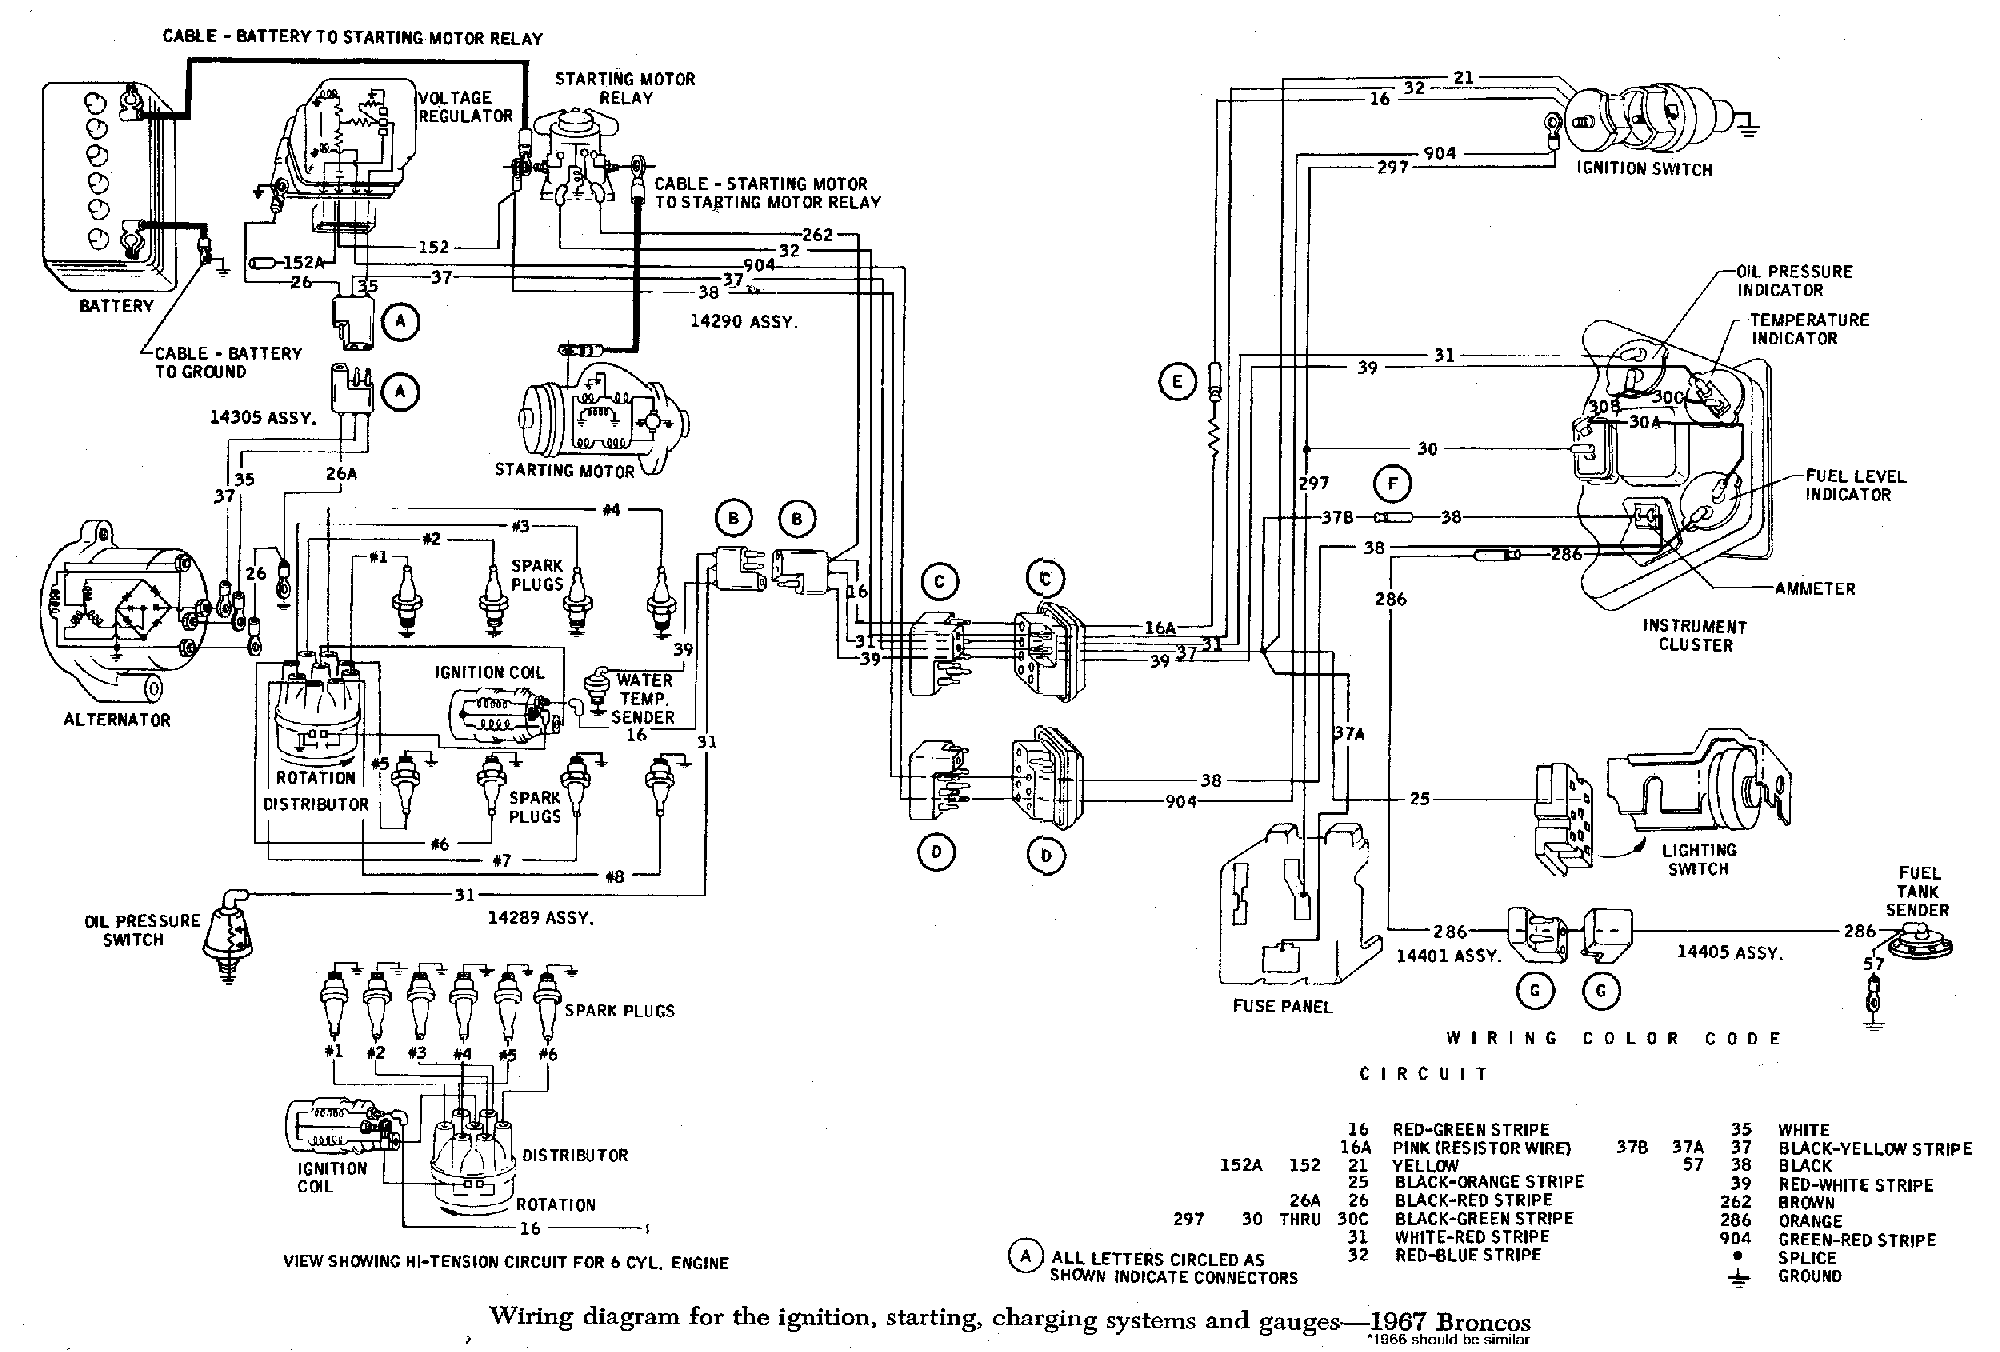 1976 Ford truck wiring harness